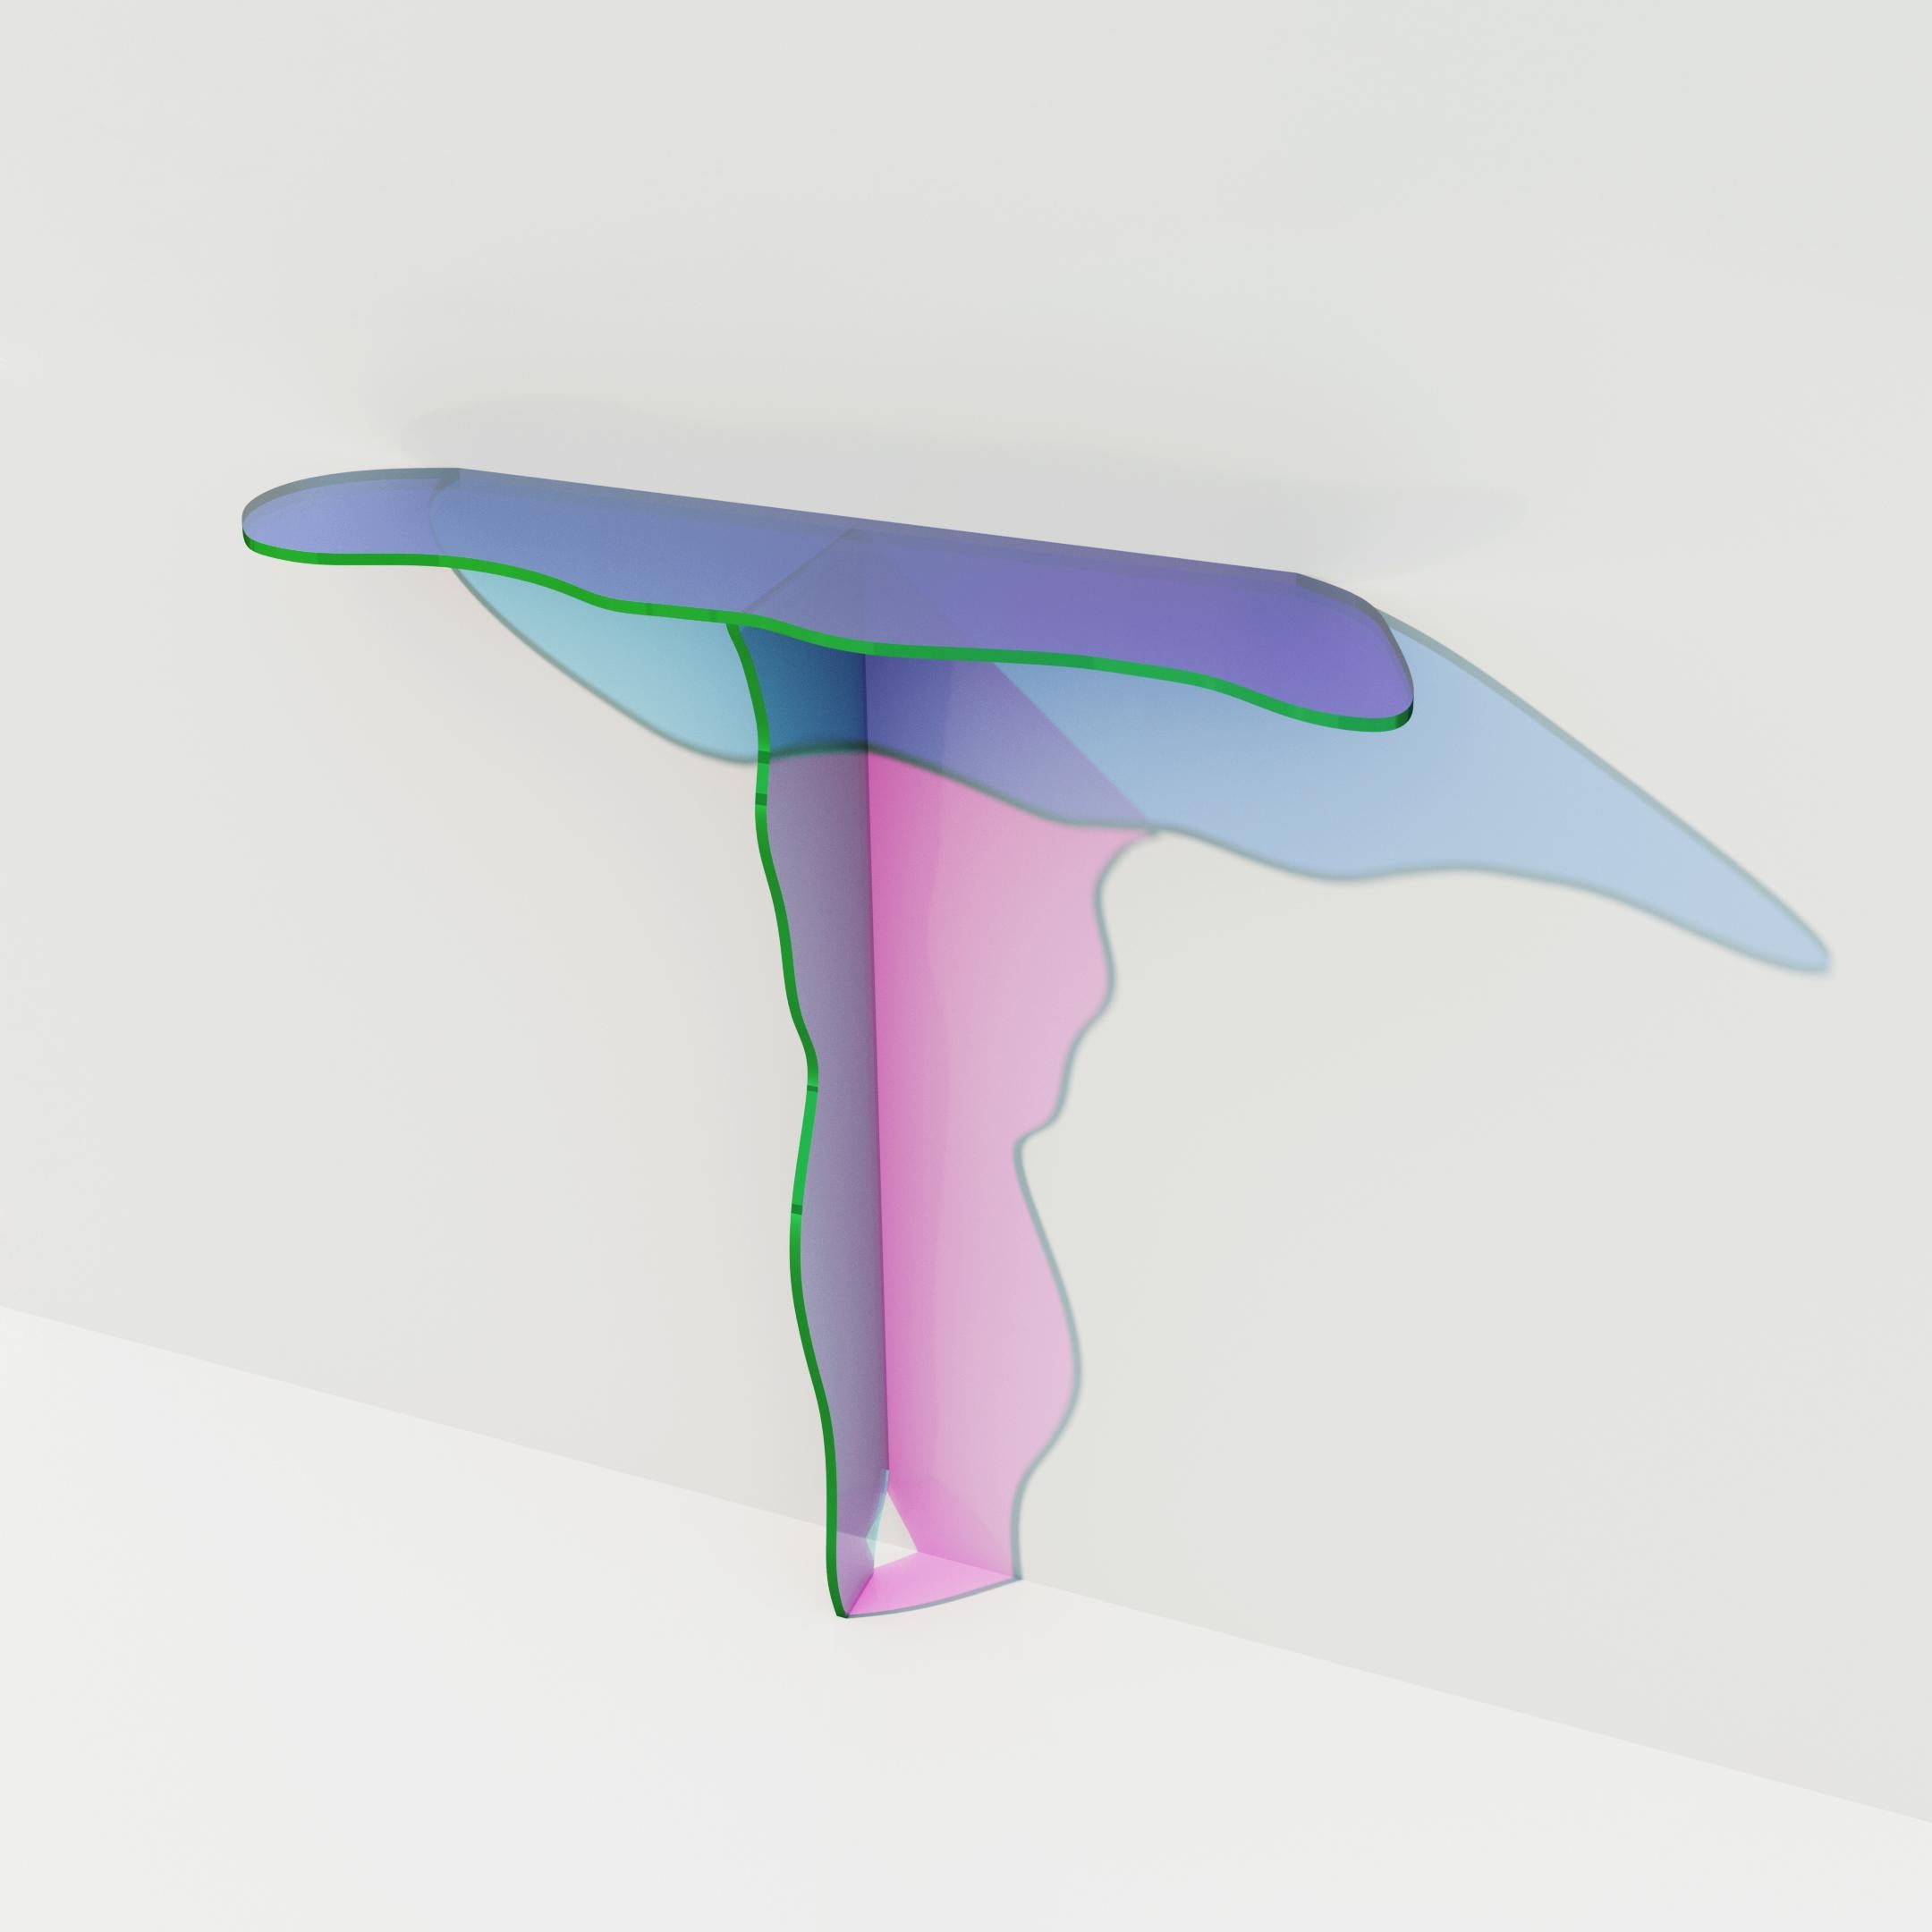 Isola console table by Brajak Vitberg
Dimensions: 30 x 100 x 100 cm
Materials: Dichroic glass, metal fixture details

The table is made out of glass with satin finish and dichroic insert.
The colors in this kind of satin finish are more subtle